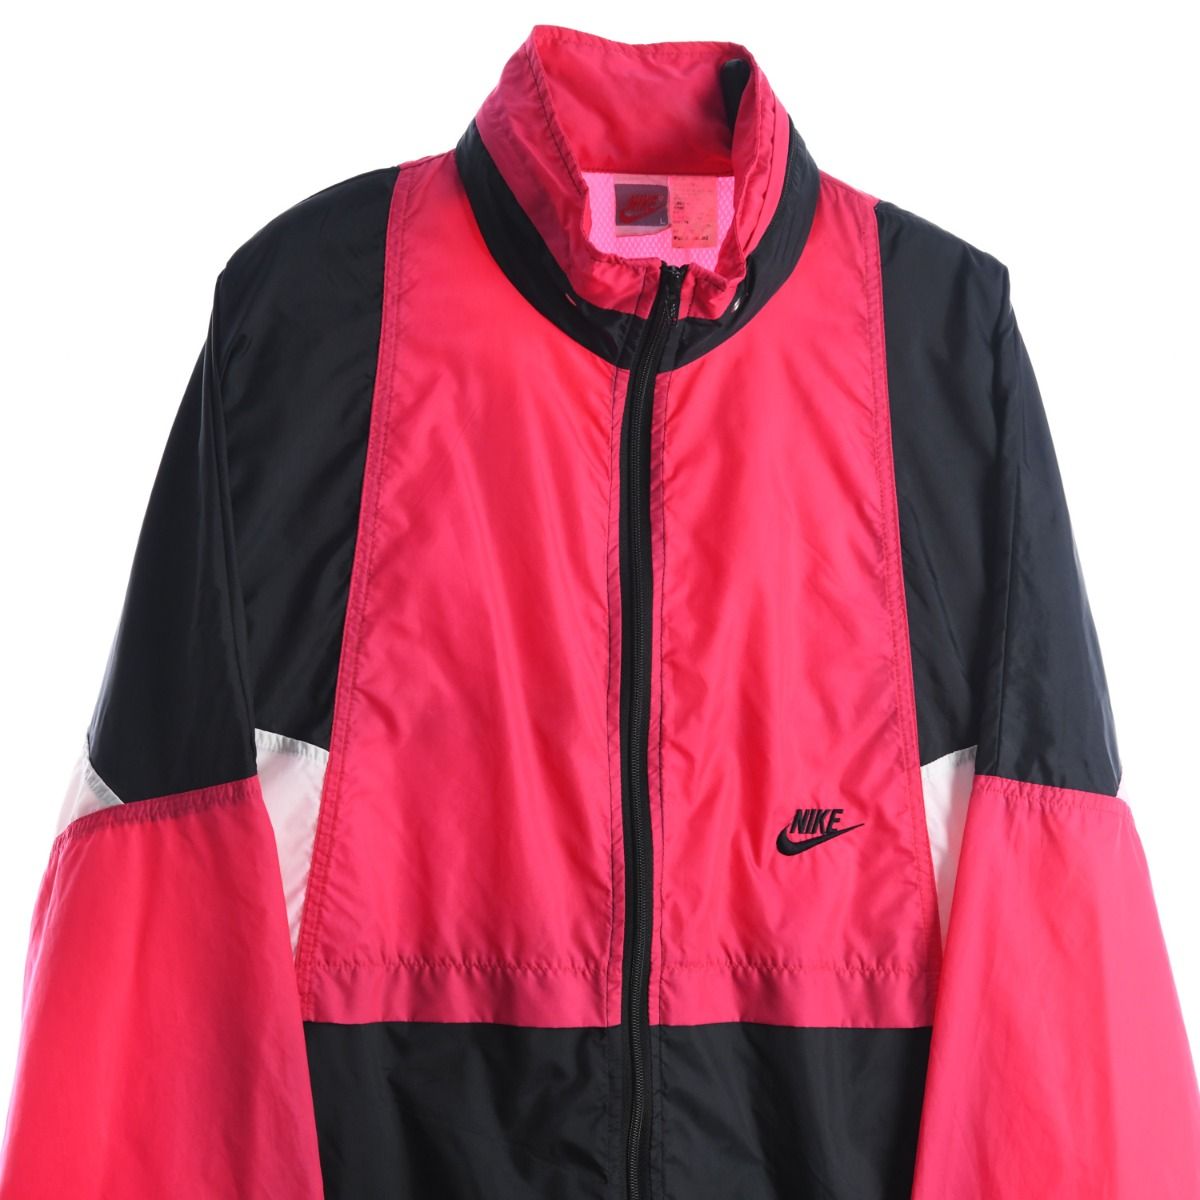 Nike Early 1990s Pink Shell Jacket